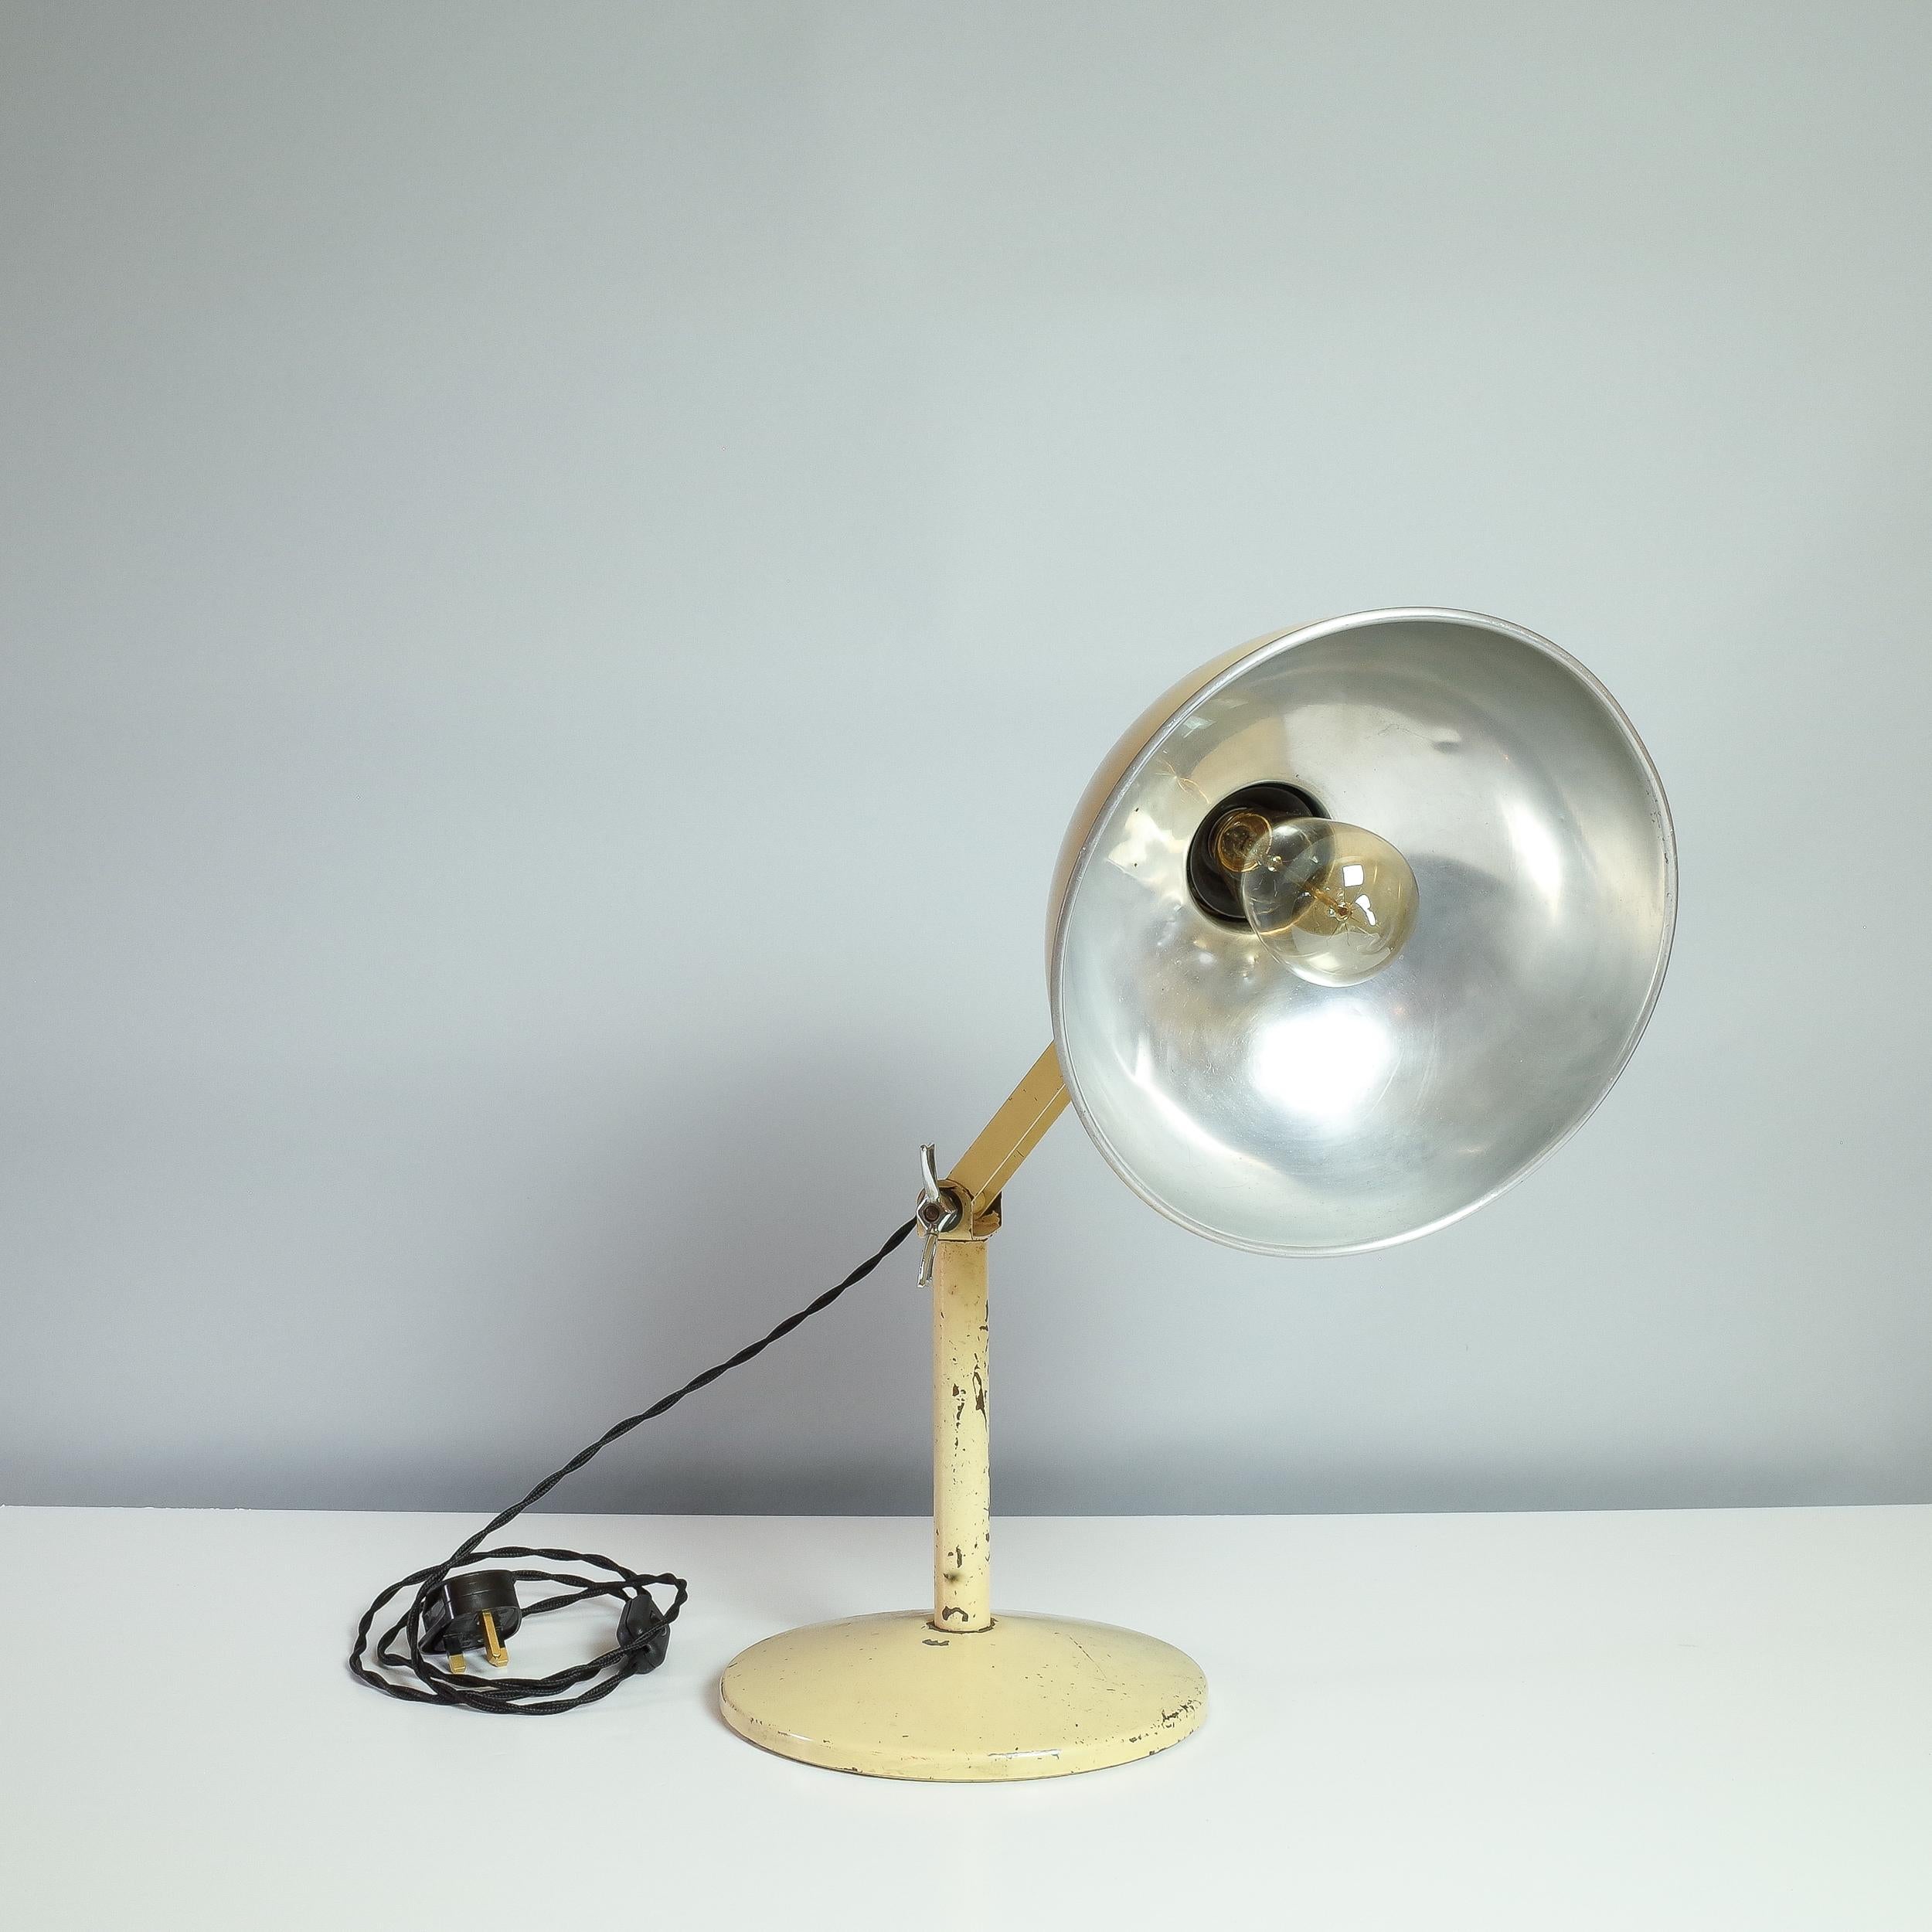 British Radiaray Industrial Desk Lamp from Hinders Ltd, London 1930s For Sale